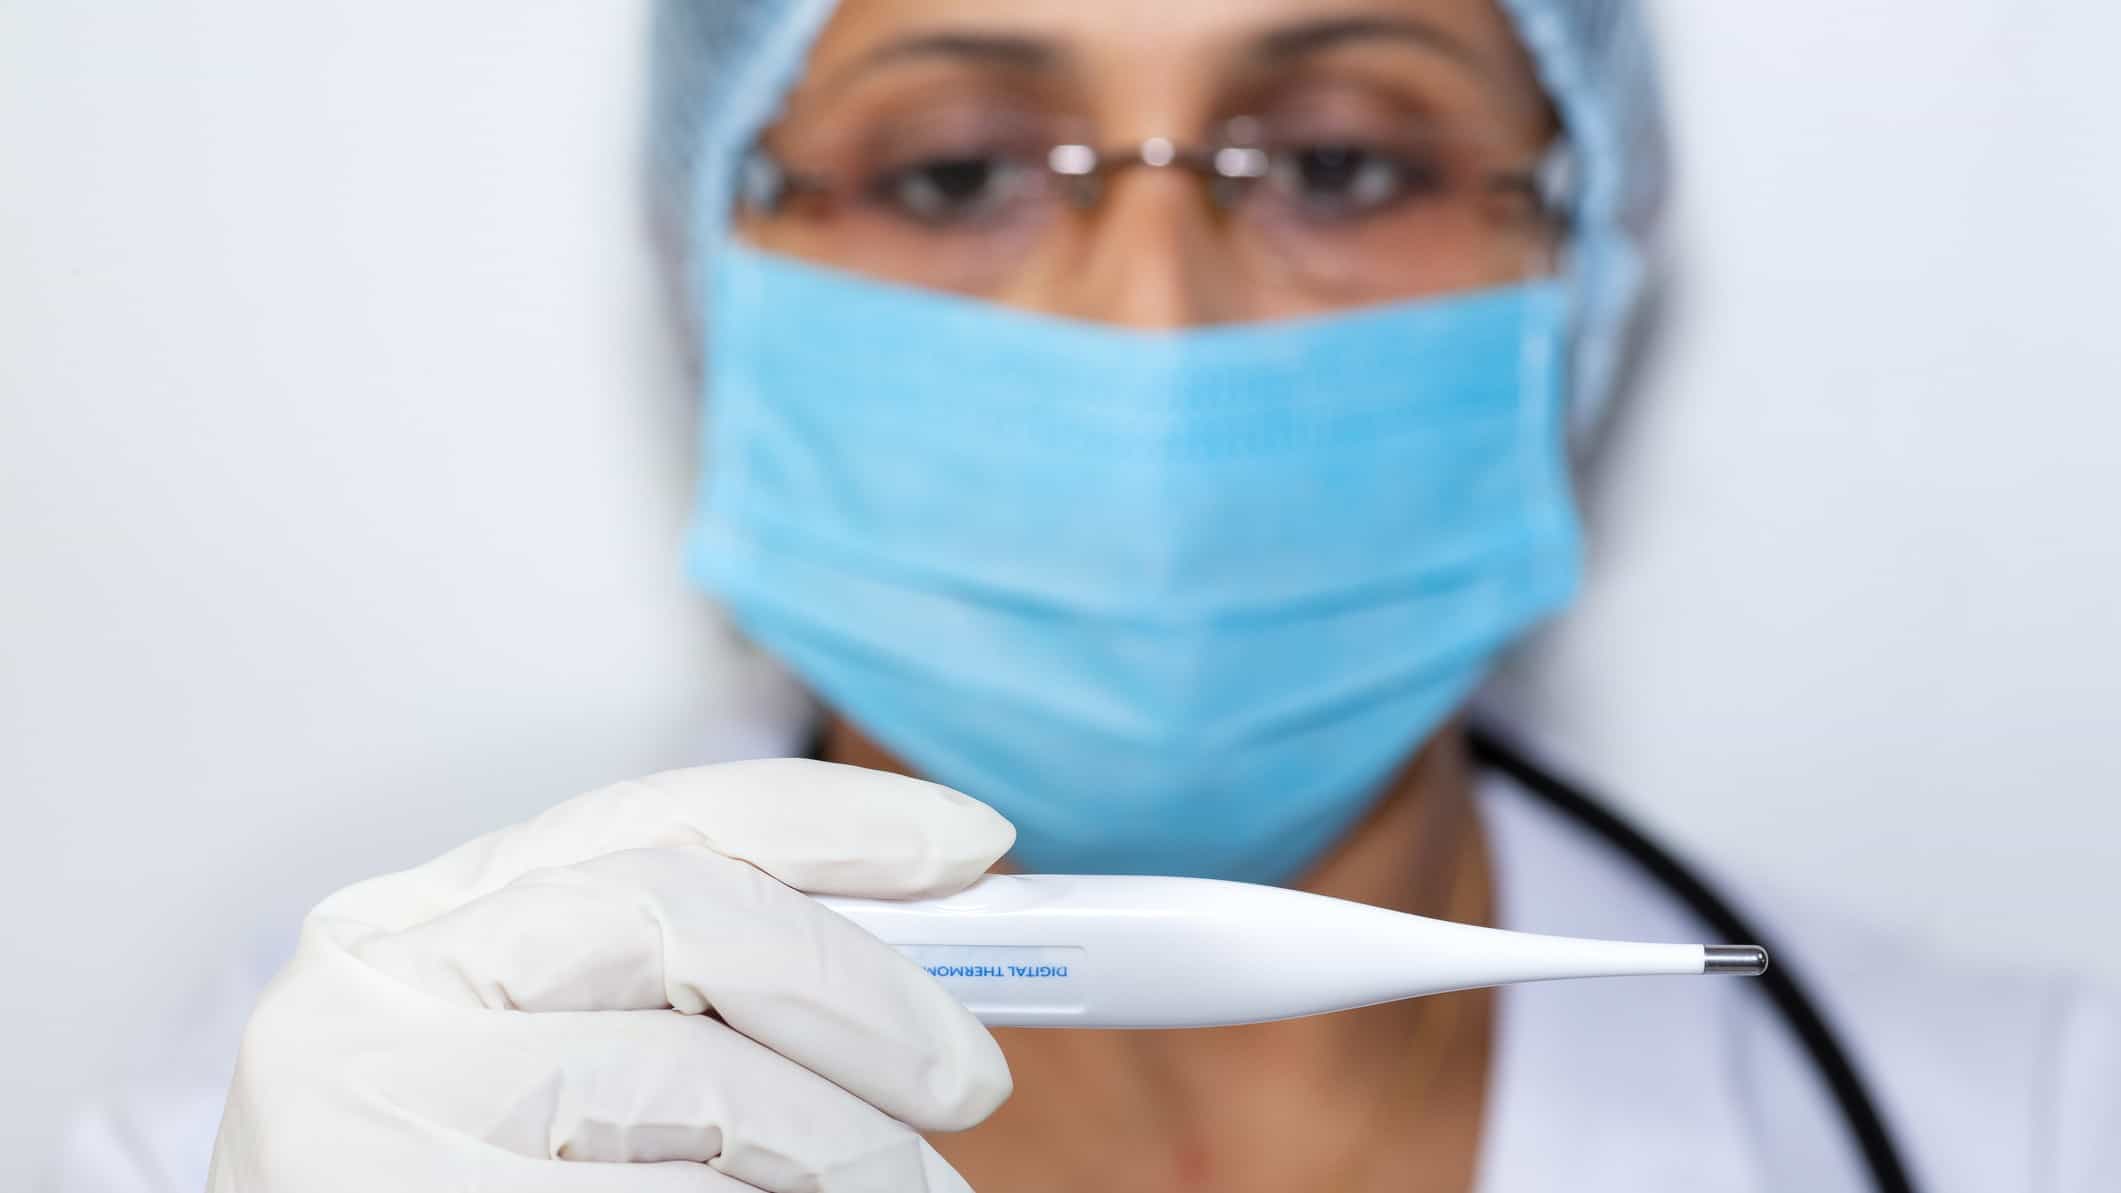 a medical person in protective clothing, rubber gloves, a mask and hair covering holds a digital thermometer up to the front of the picture as if to take someone's temperature.